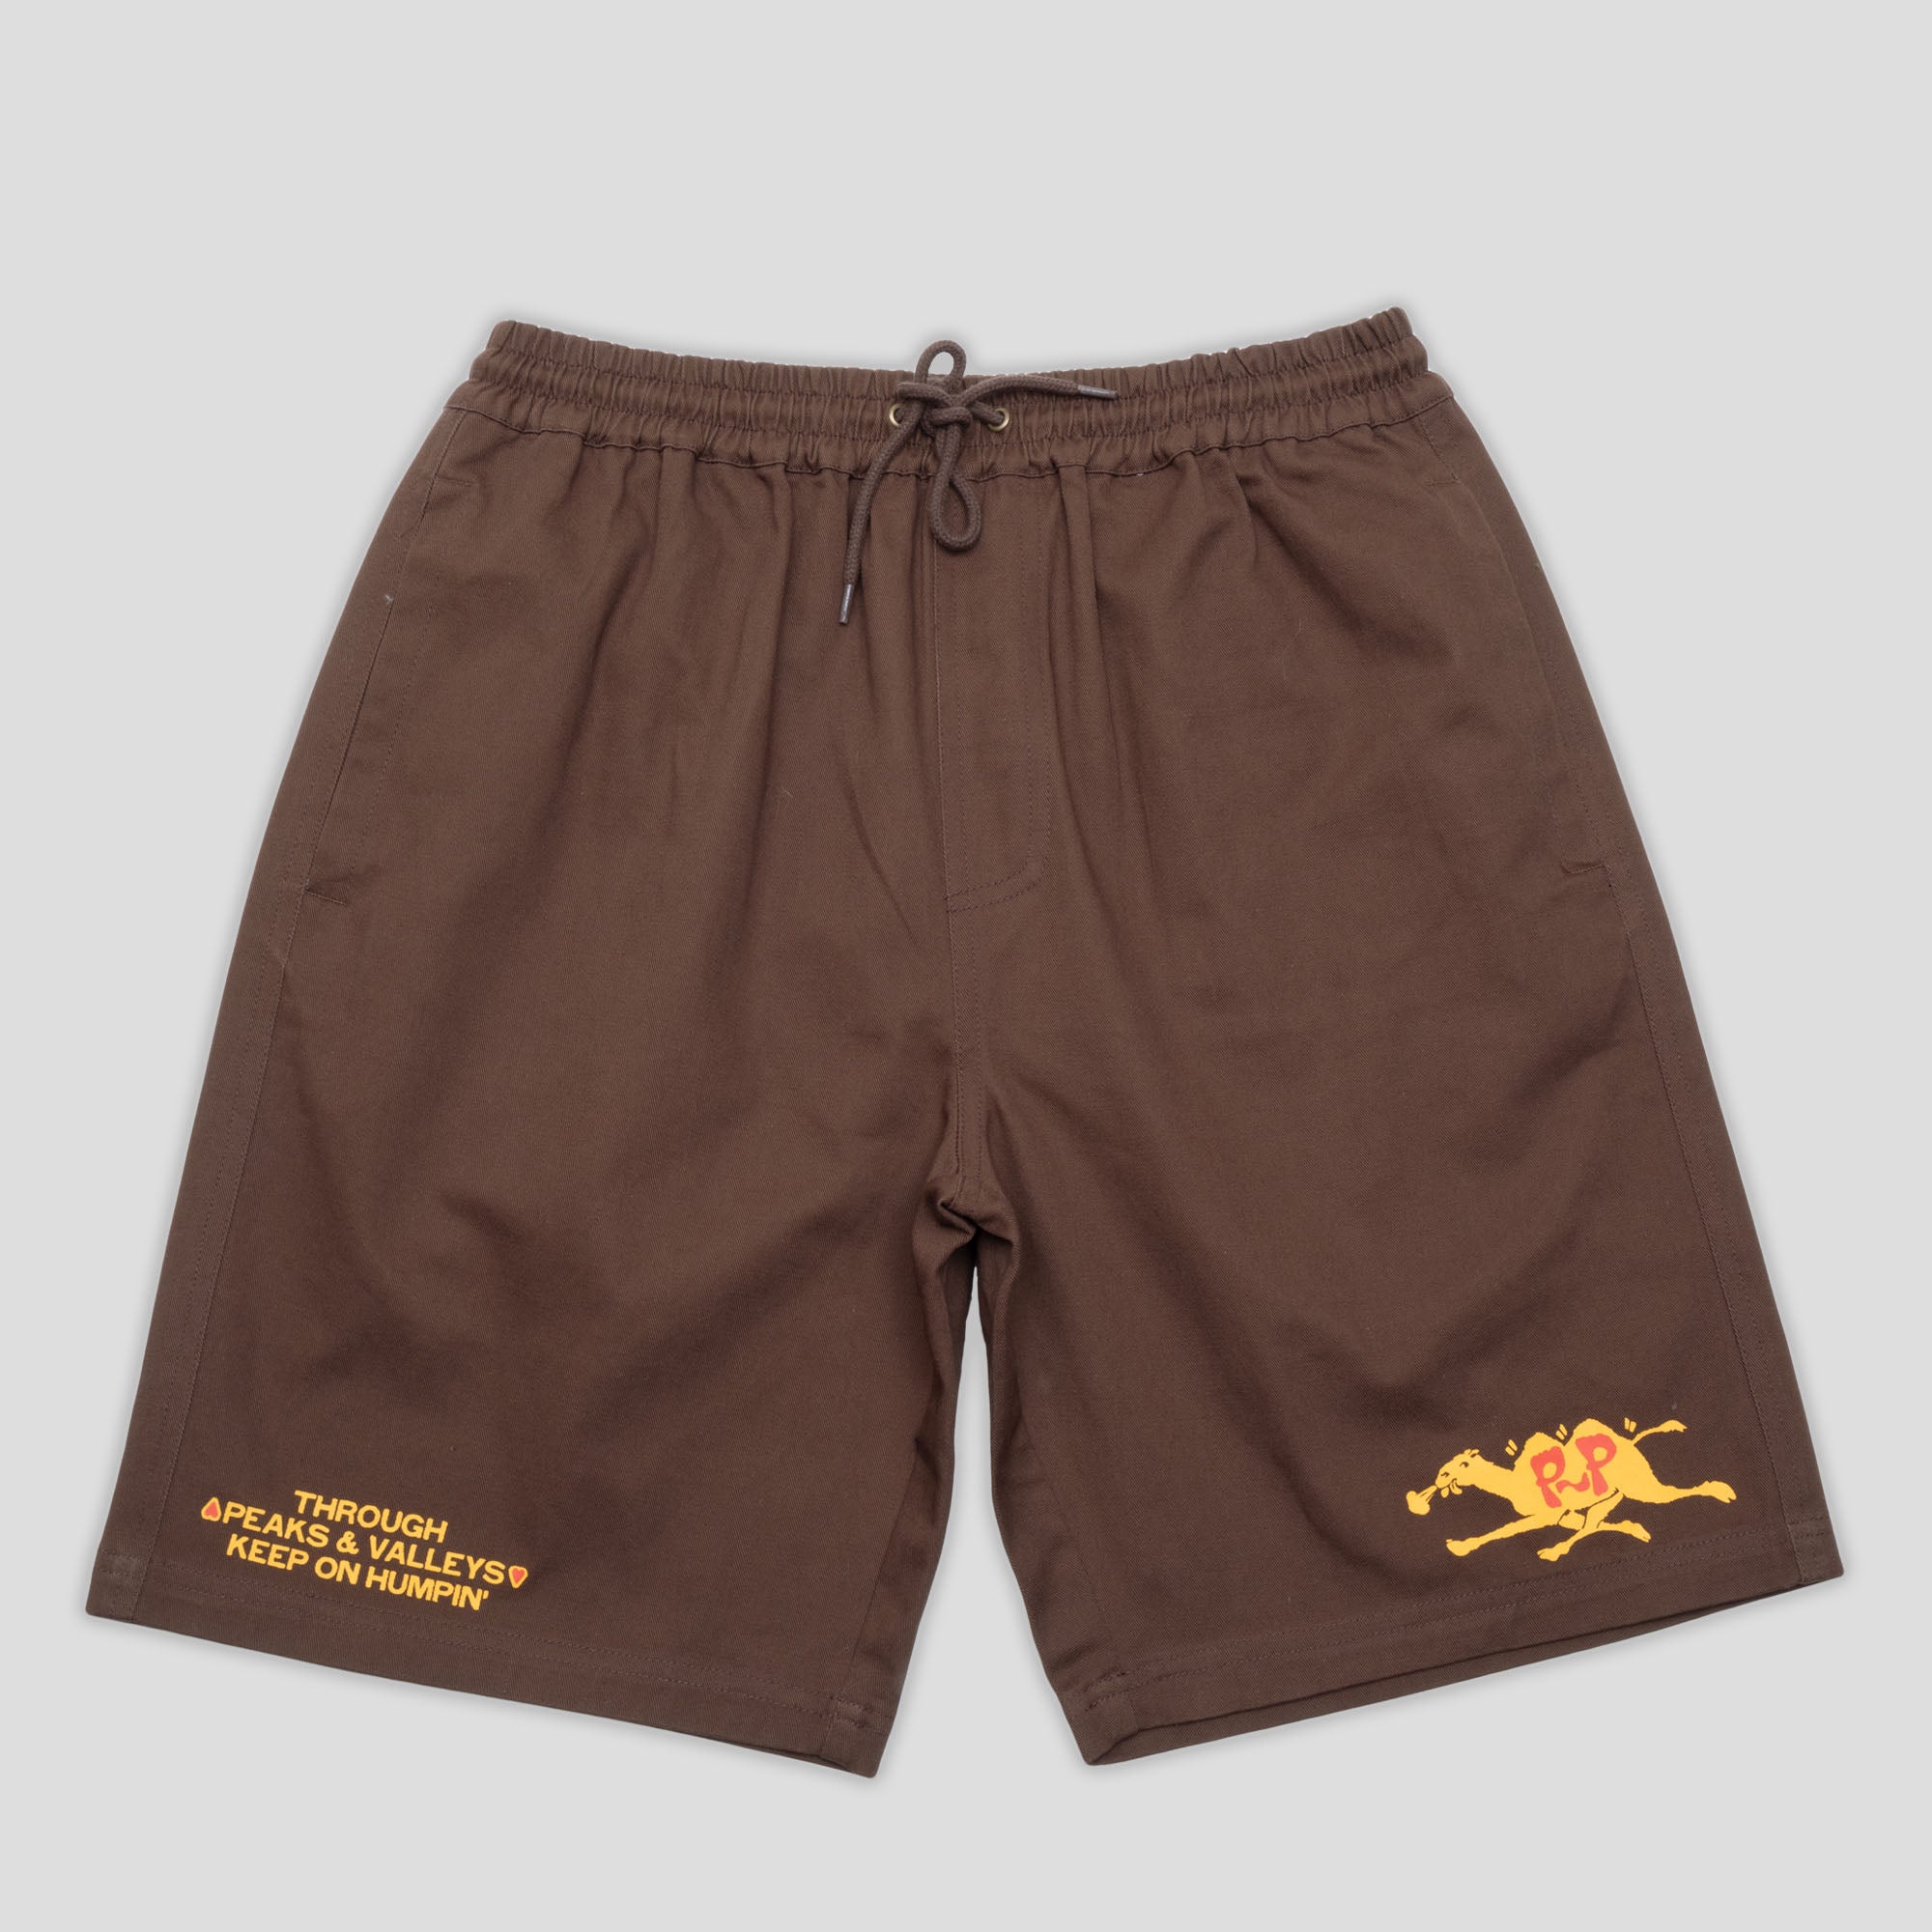 Pass~Port Peaks and Valleys Casual Short - Chocolate